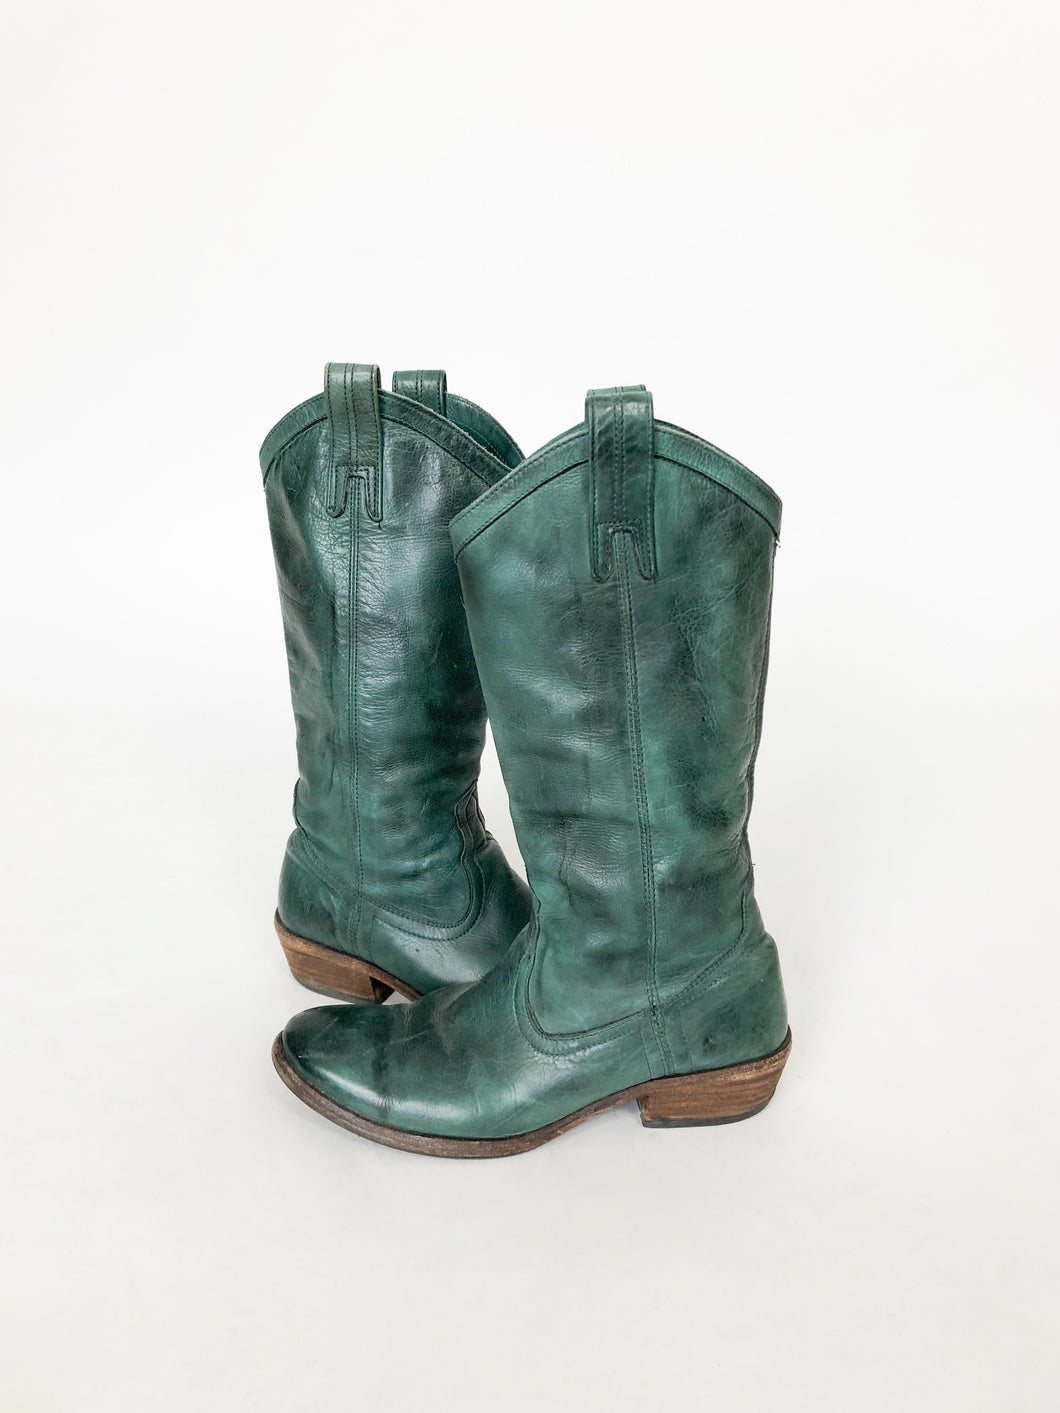 Vintage FRYE Jade Green Carson Western Boots Size 6.5